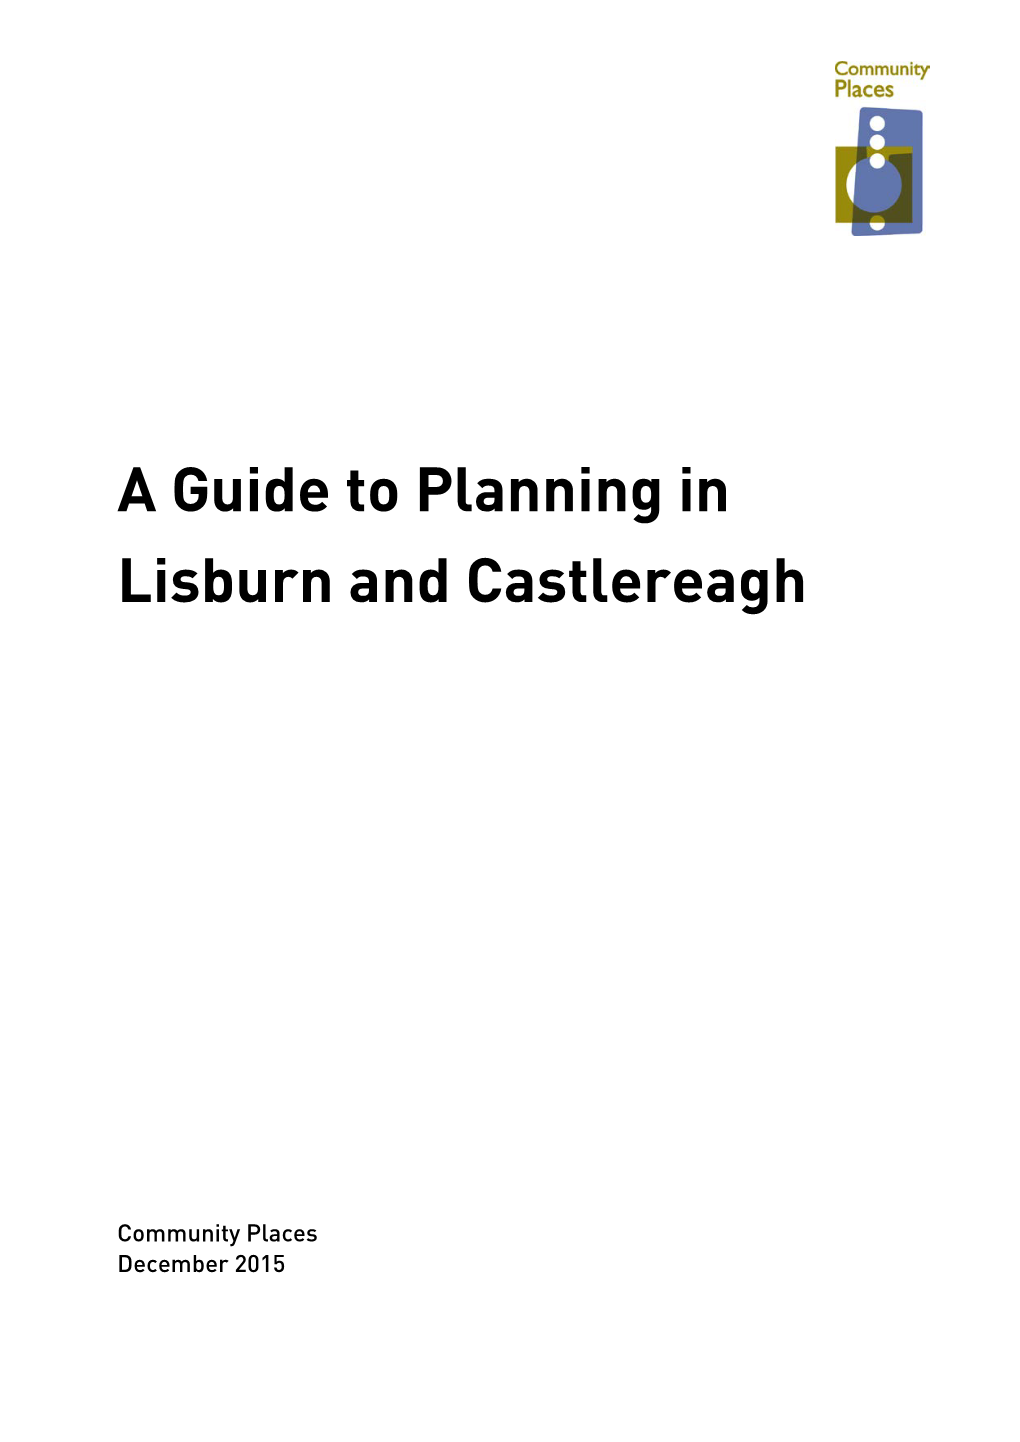 A Guide to Planning in Lisburn and Castlereagh